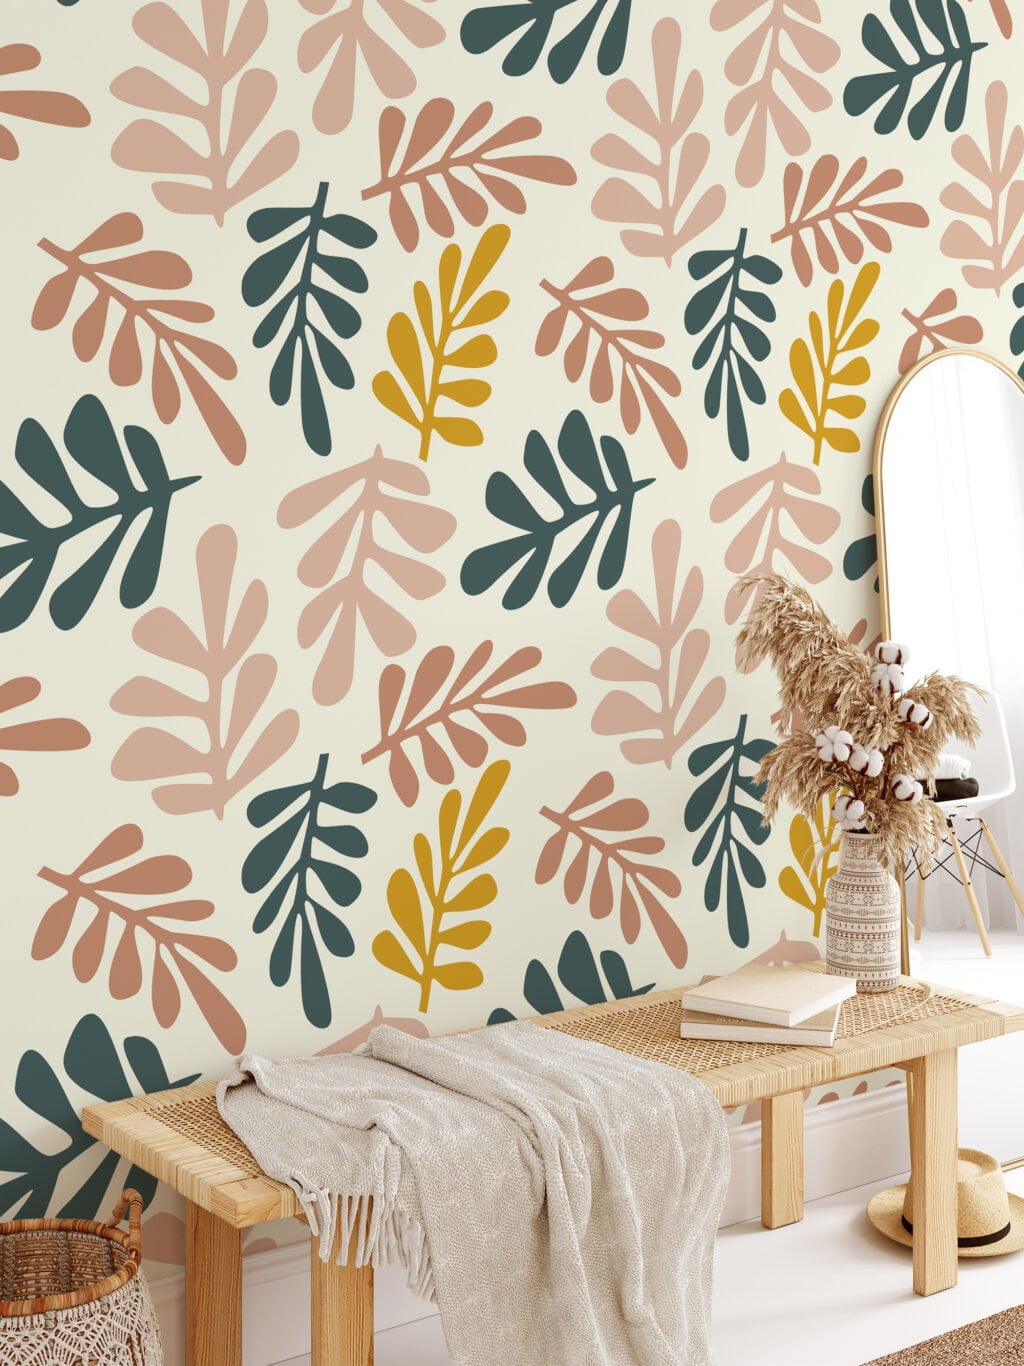 Abstract Boho Shaped Leaves Pattern Illustration Wallpaper, Soothing Leaf Pattern Peel & Stick Wall Mural